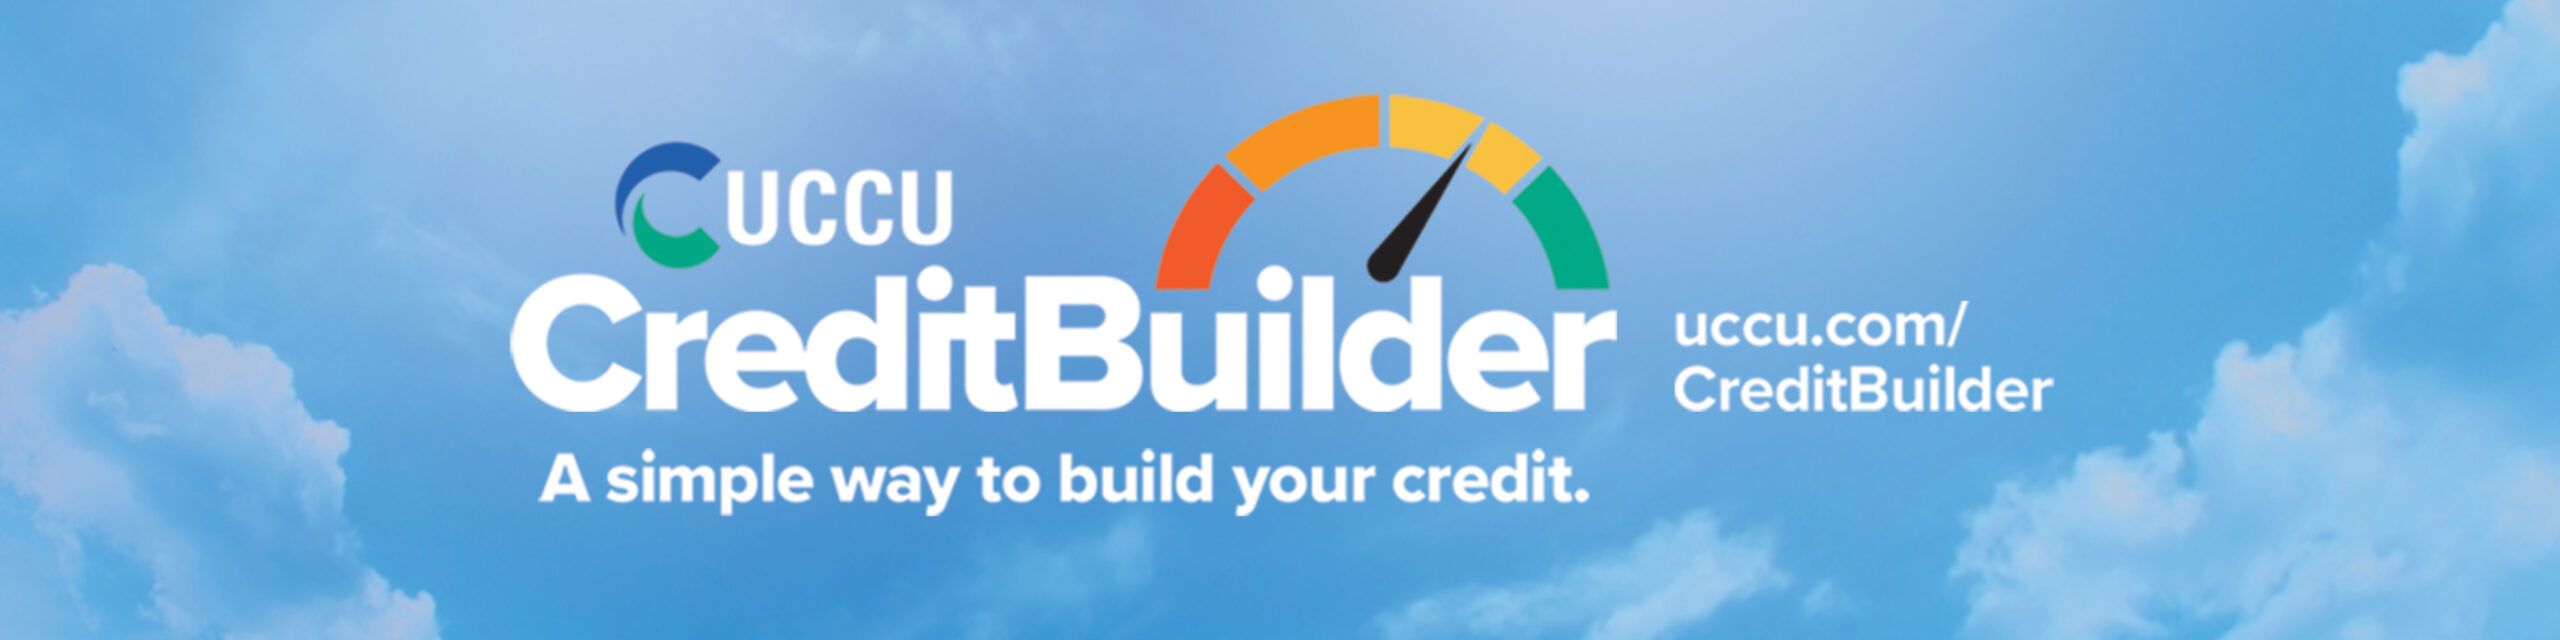 Credit builder logo. Sky background with scale logo